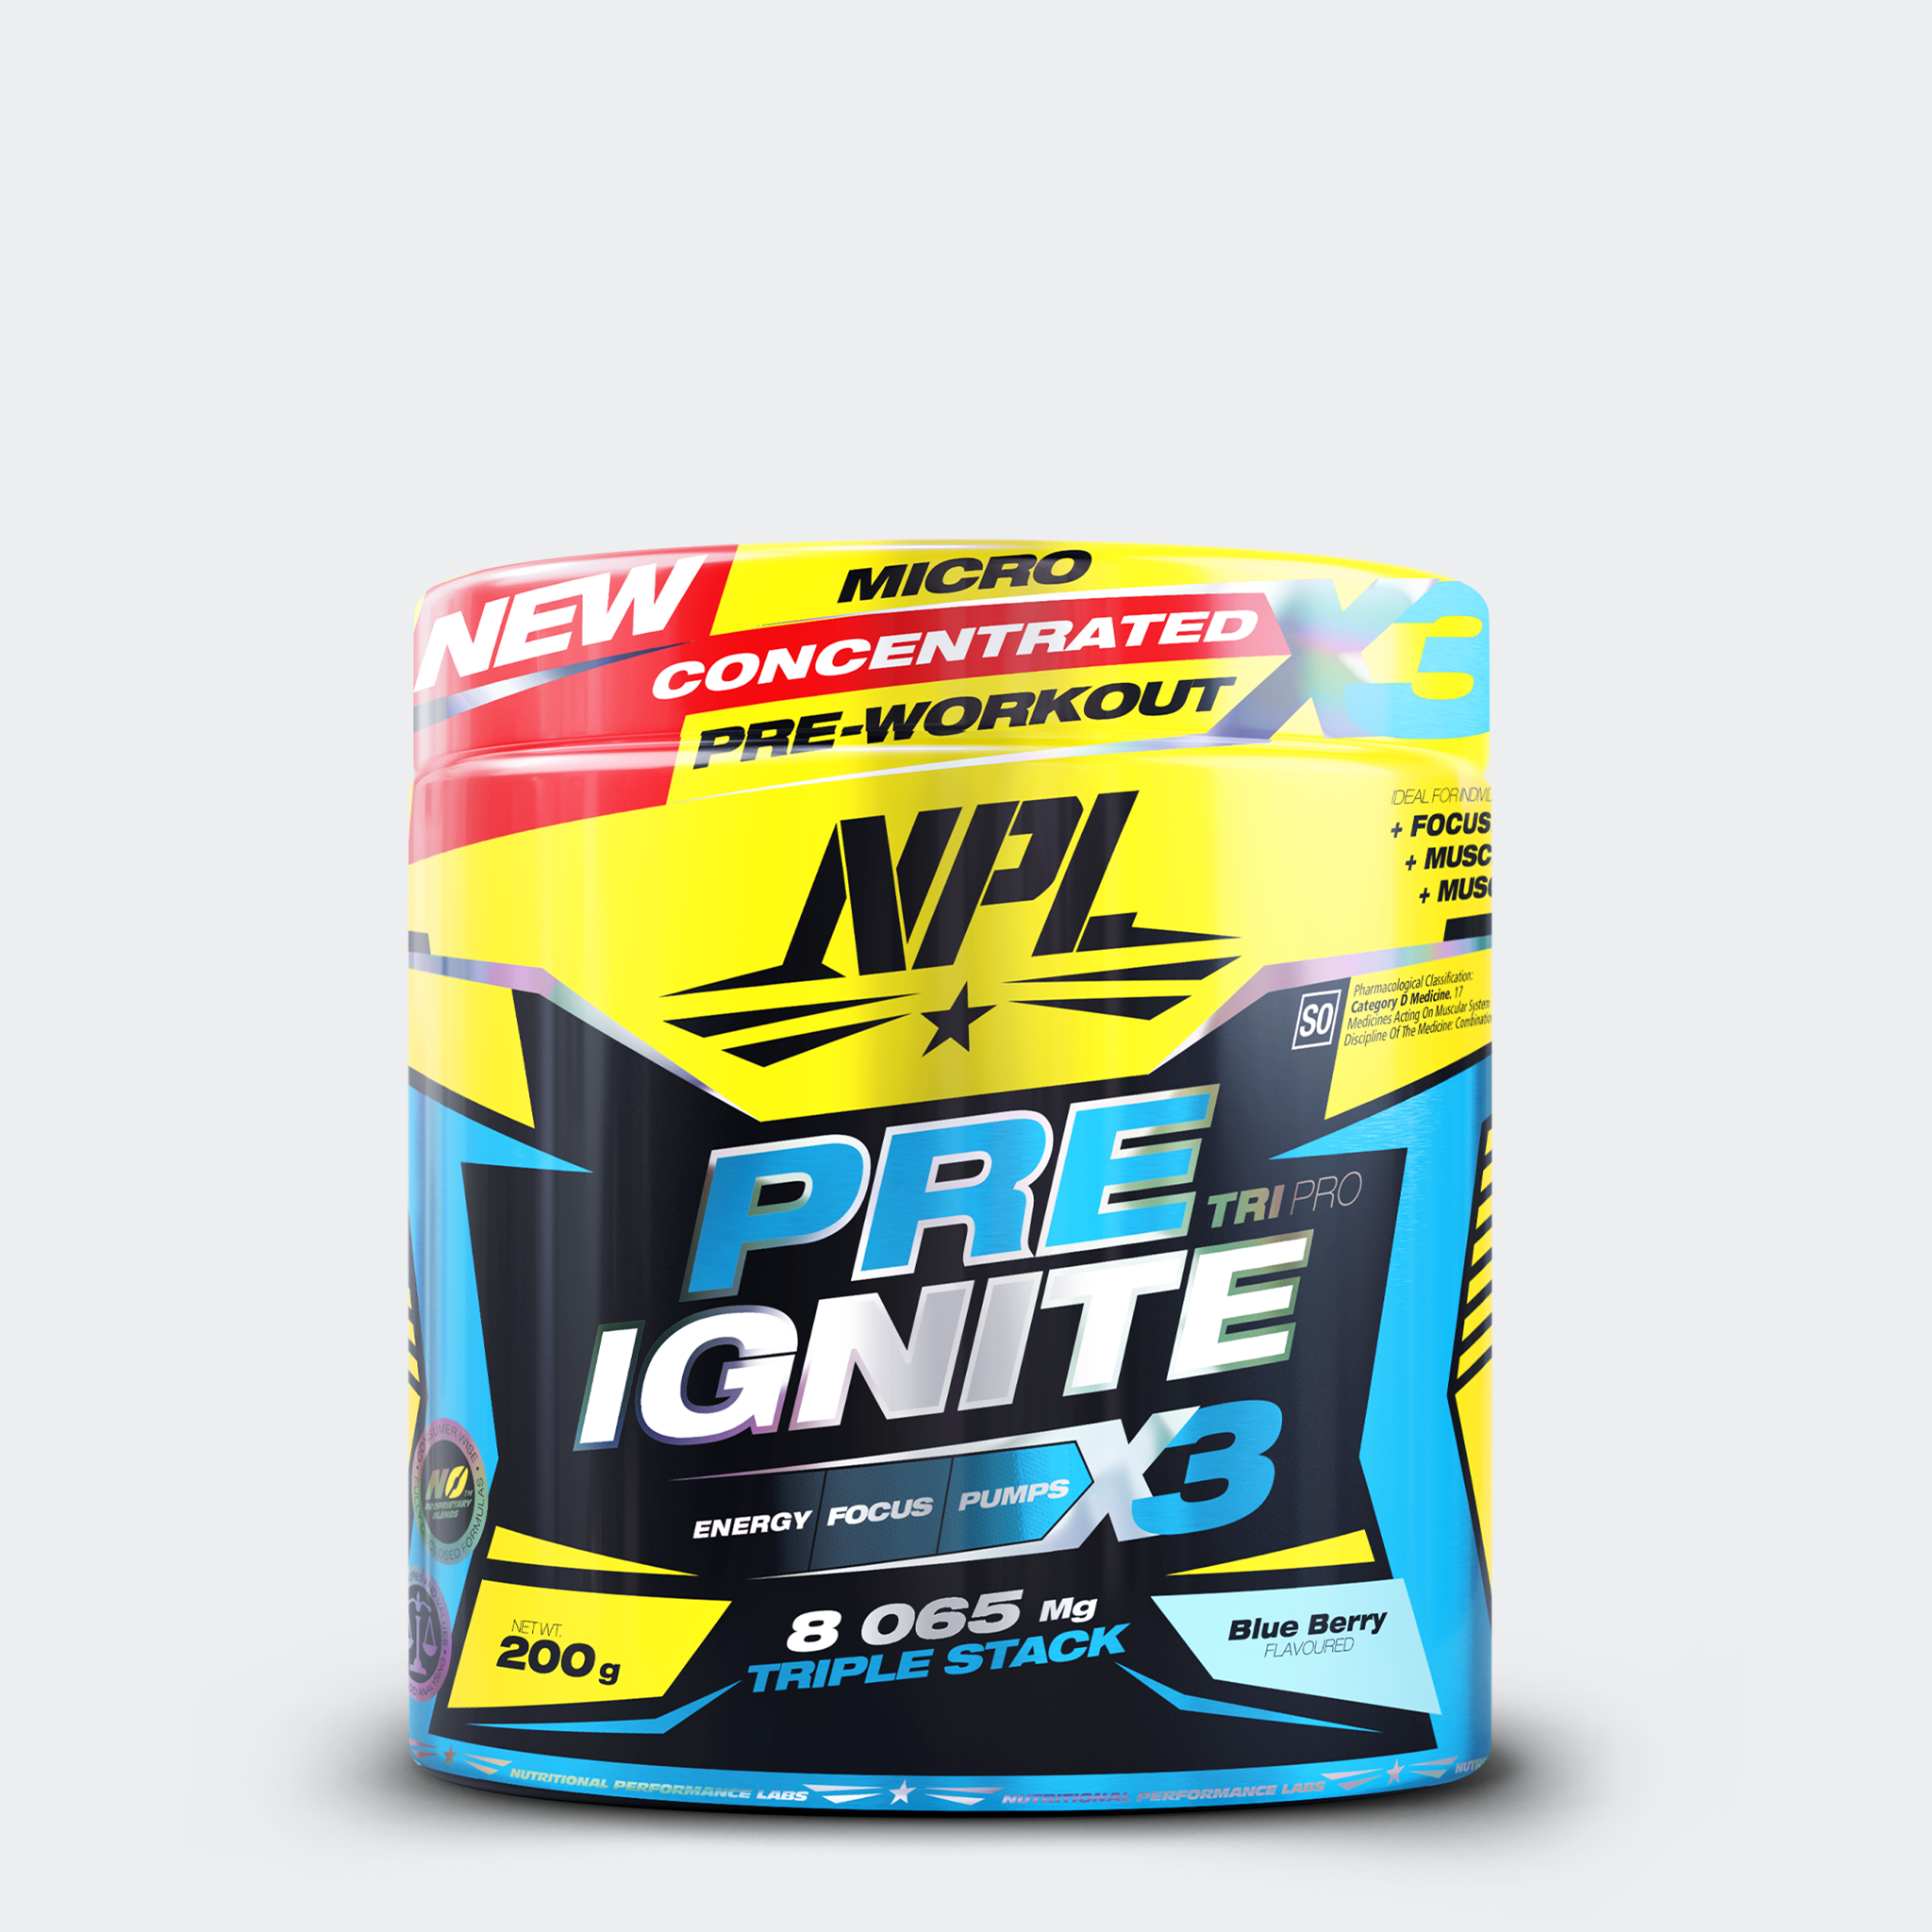 Pre-ignite pre workout for enhanced energy and focus - Blueberry flavour